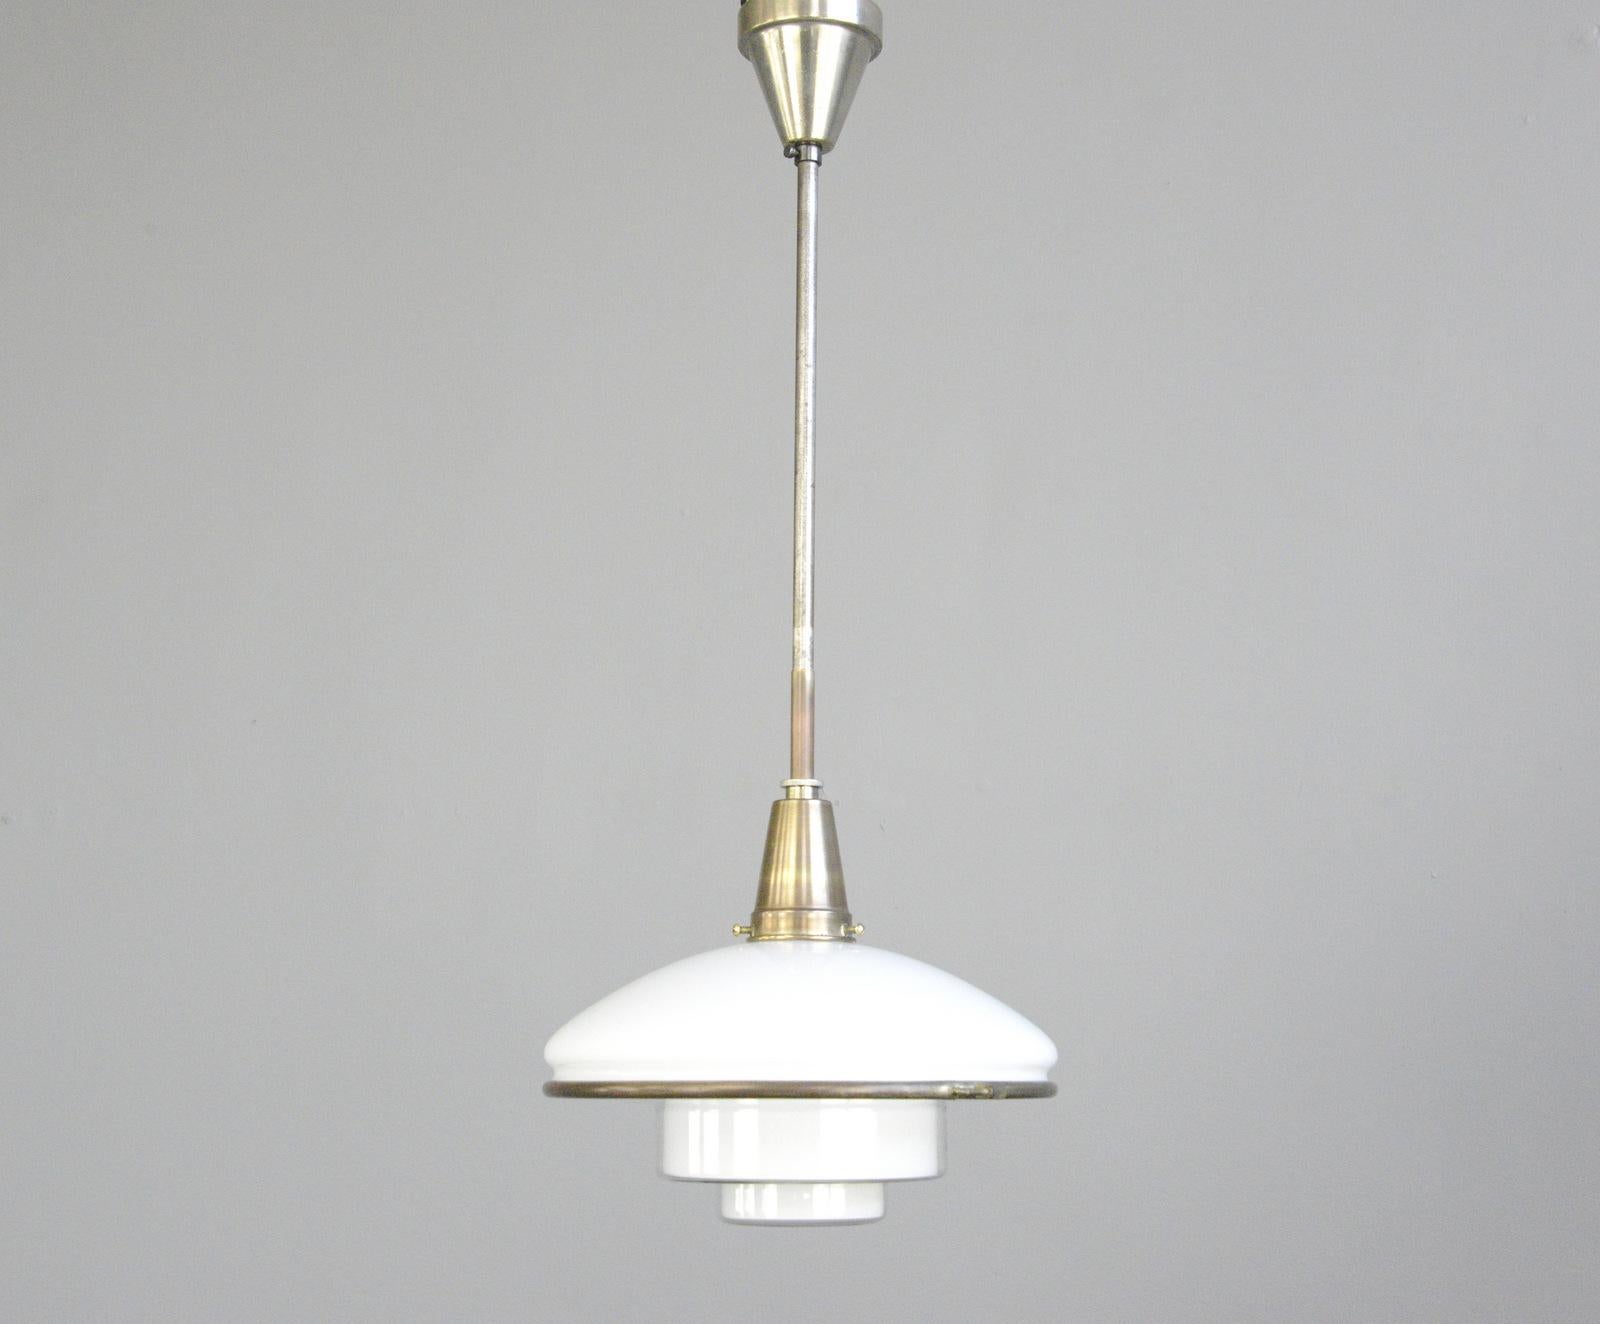 Sistrah pendant light by Otto Muller, circa 1930s

- Original nickel coated brass gallery and stem
- Opaline glass top with stepped glass base
- Takes E27 fitting bulbs
- Designed by Otto Muller for Sistrah
- German, 1930s
- Measures: 32cm